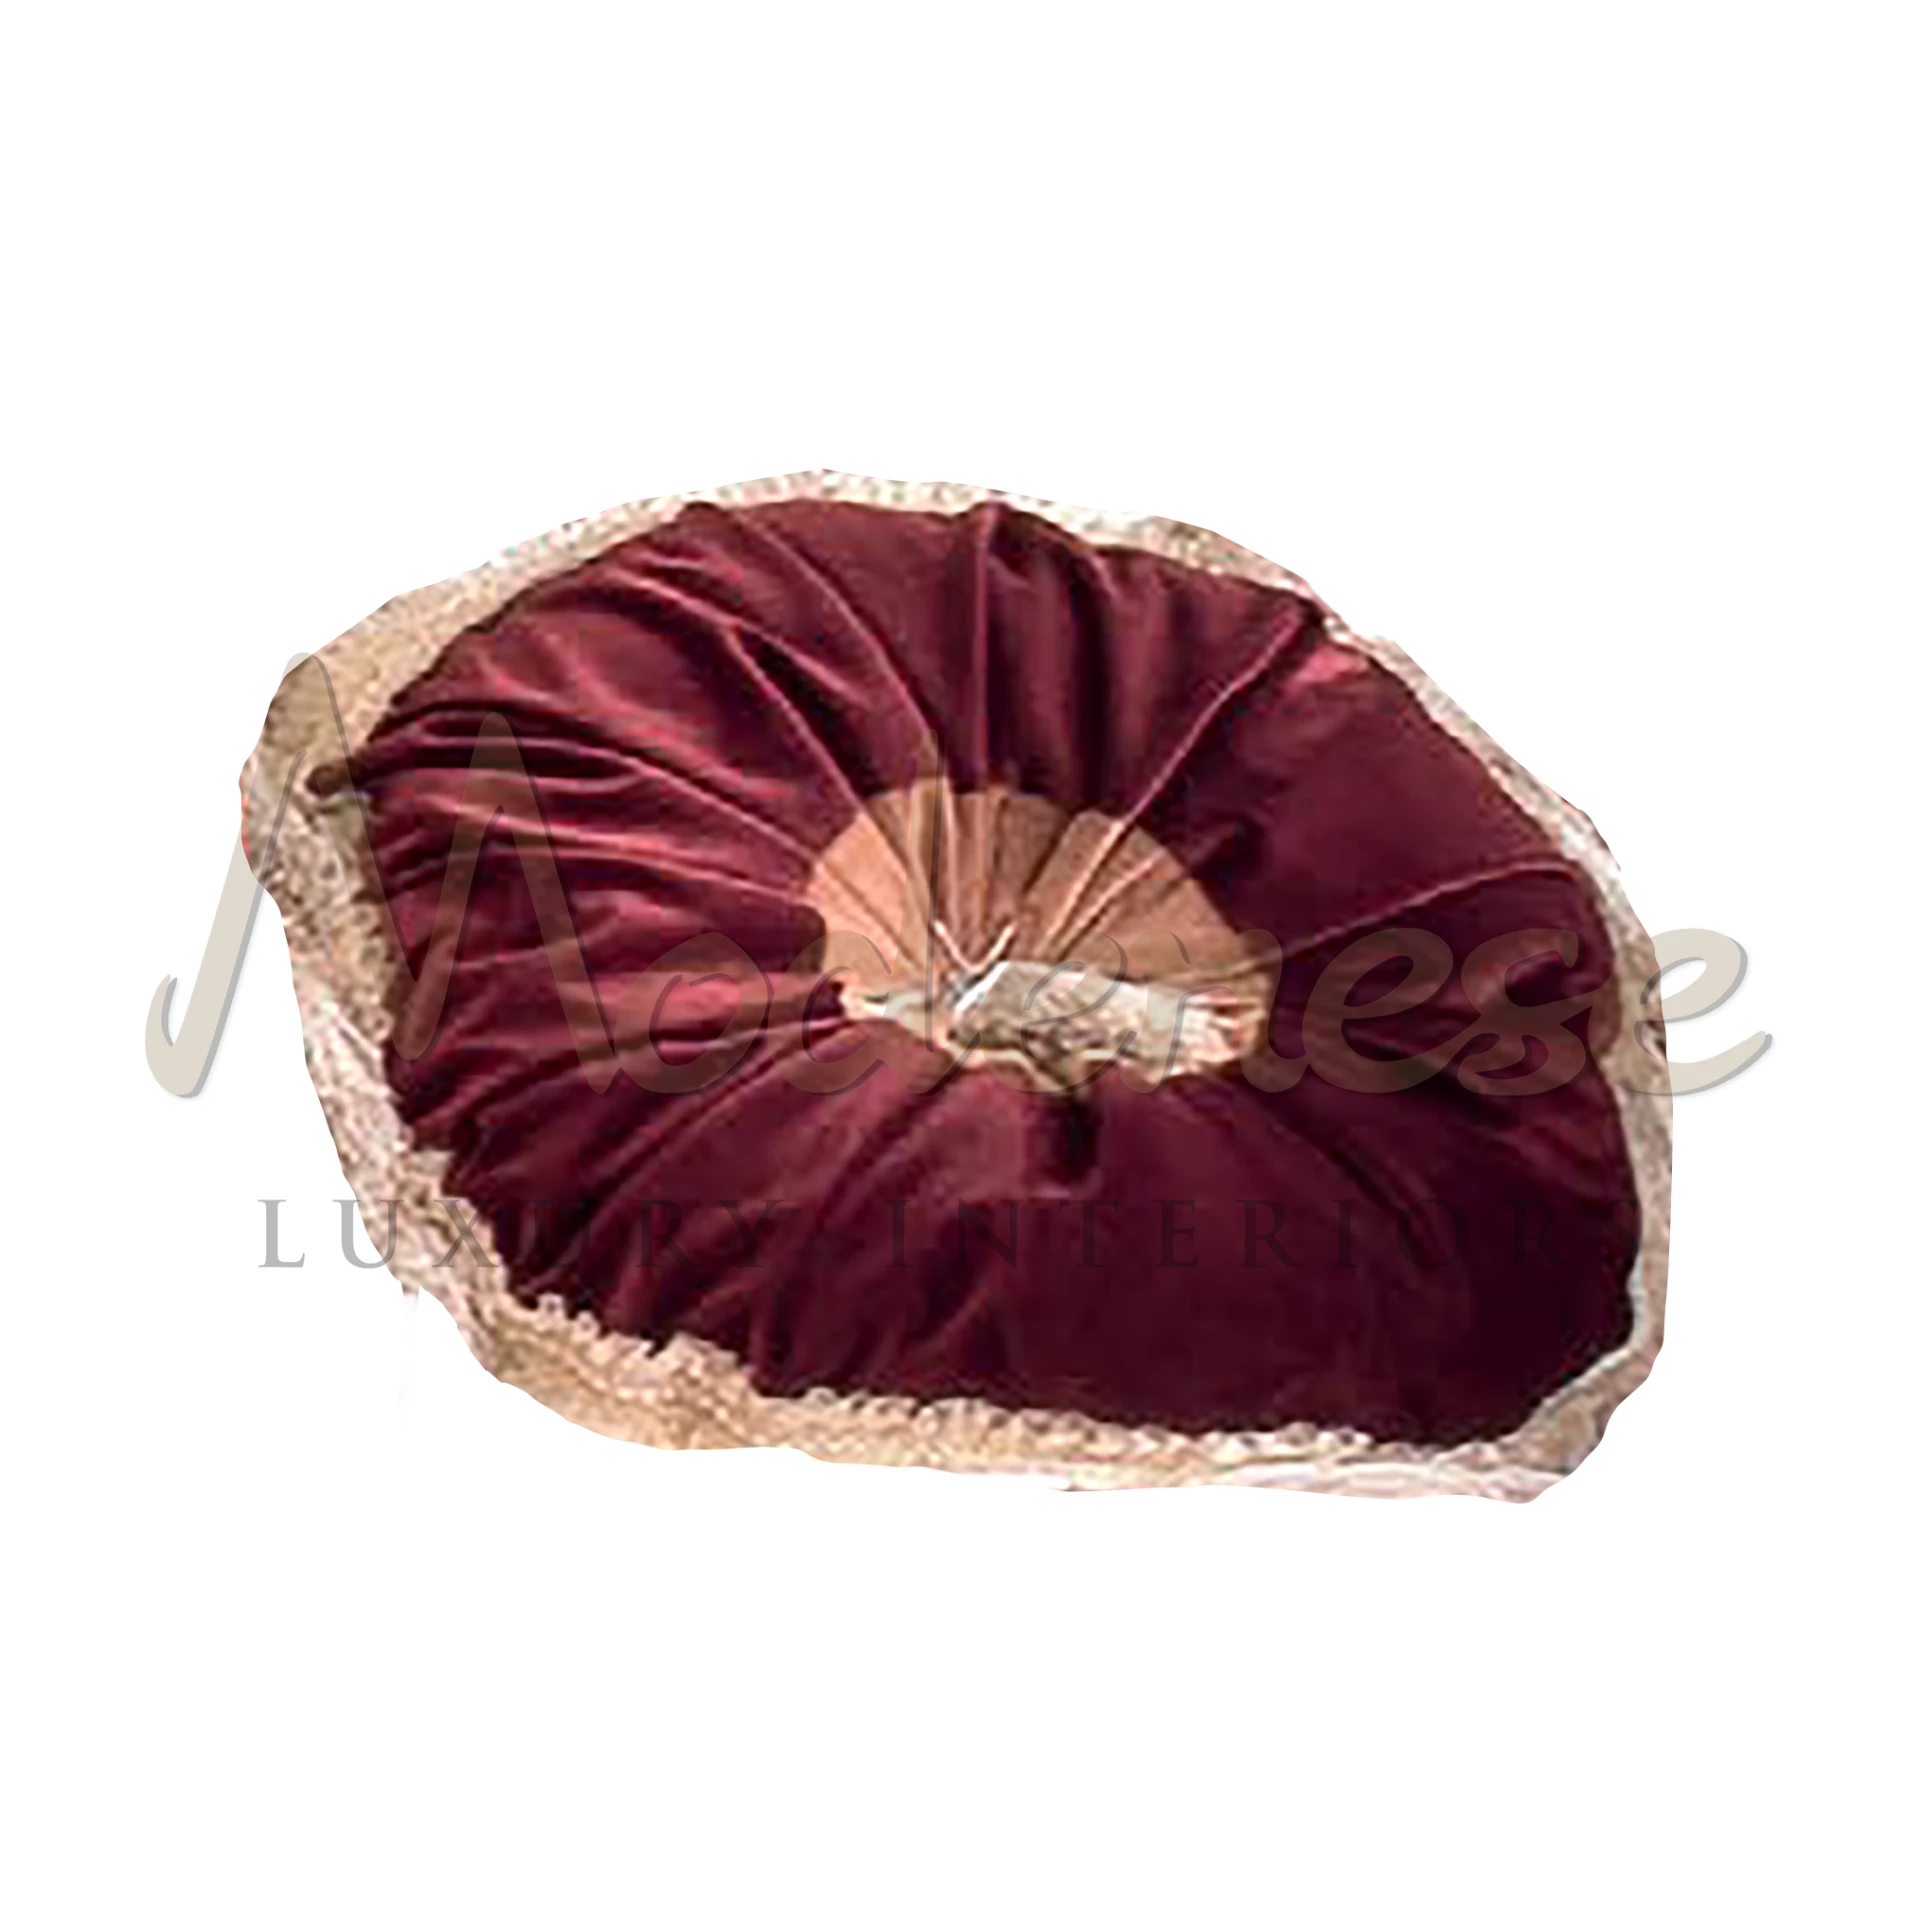 Striking Imperial Round Red Pillow, adding a bold and sophisticated touch to interiors with its luxurious, high-quality design.